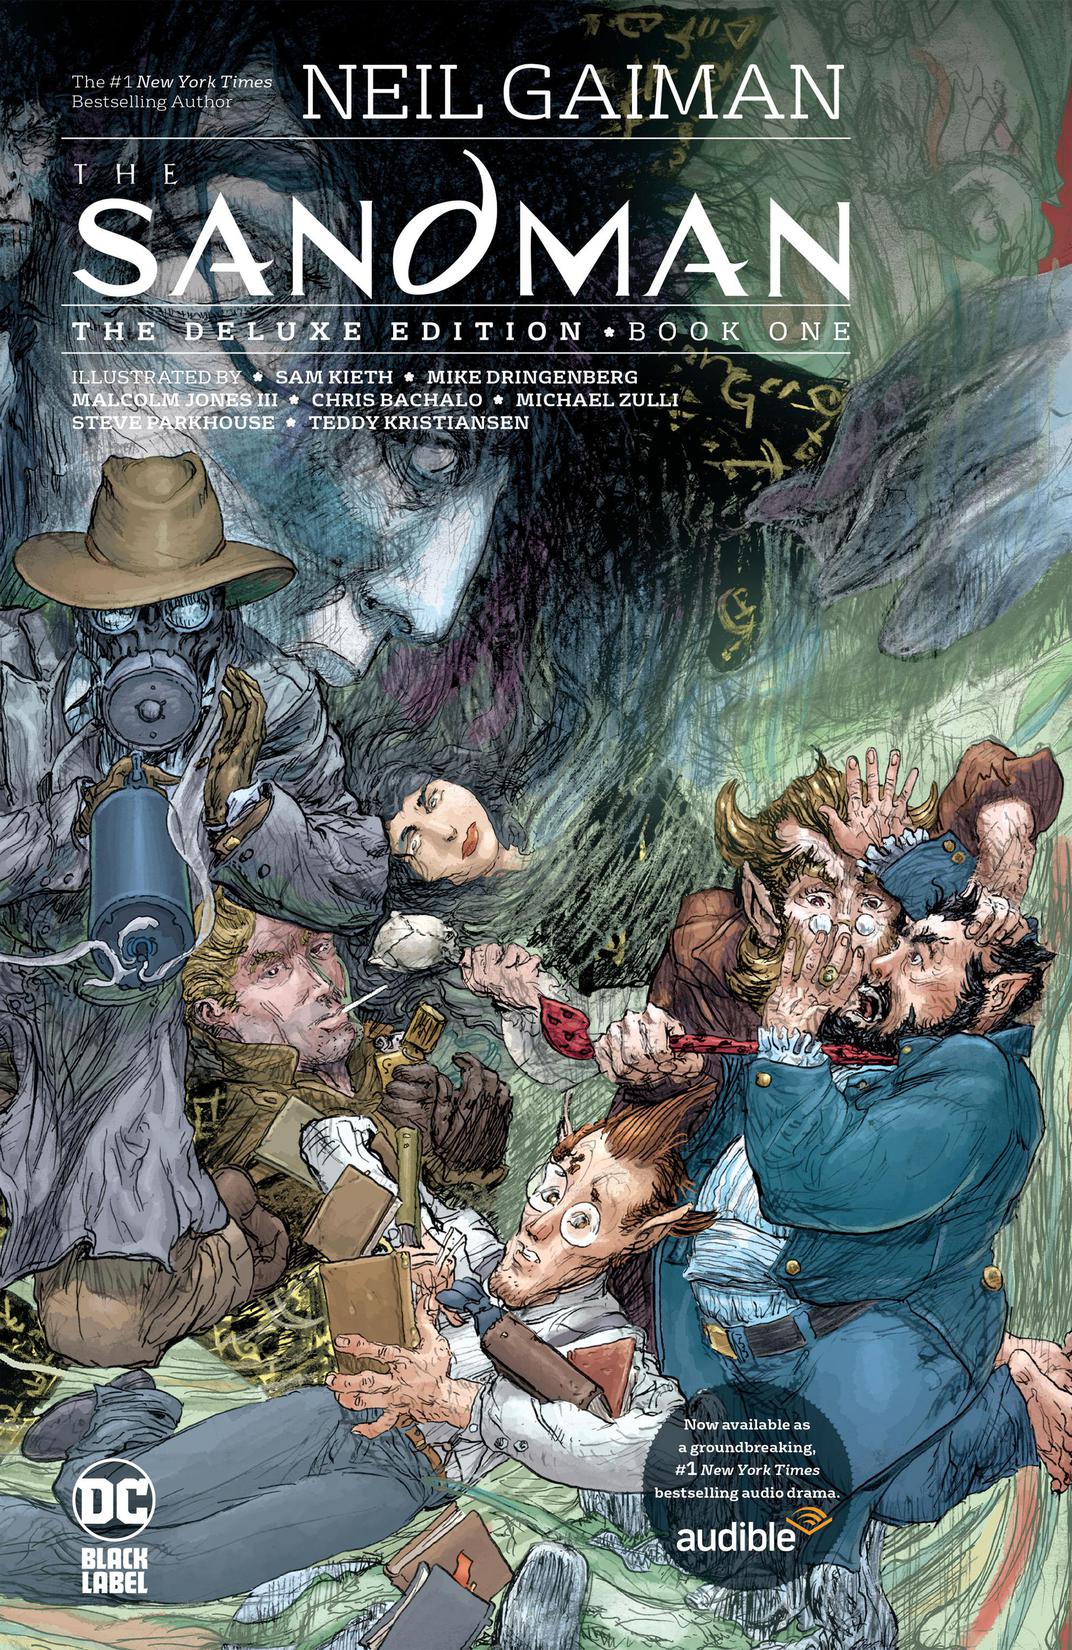 The Sandman: The Deluxe Edition Book One preview images